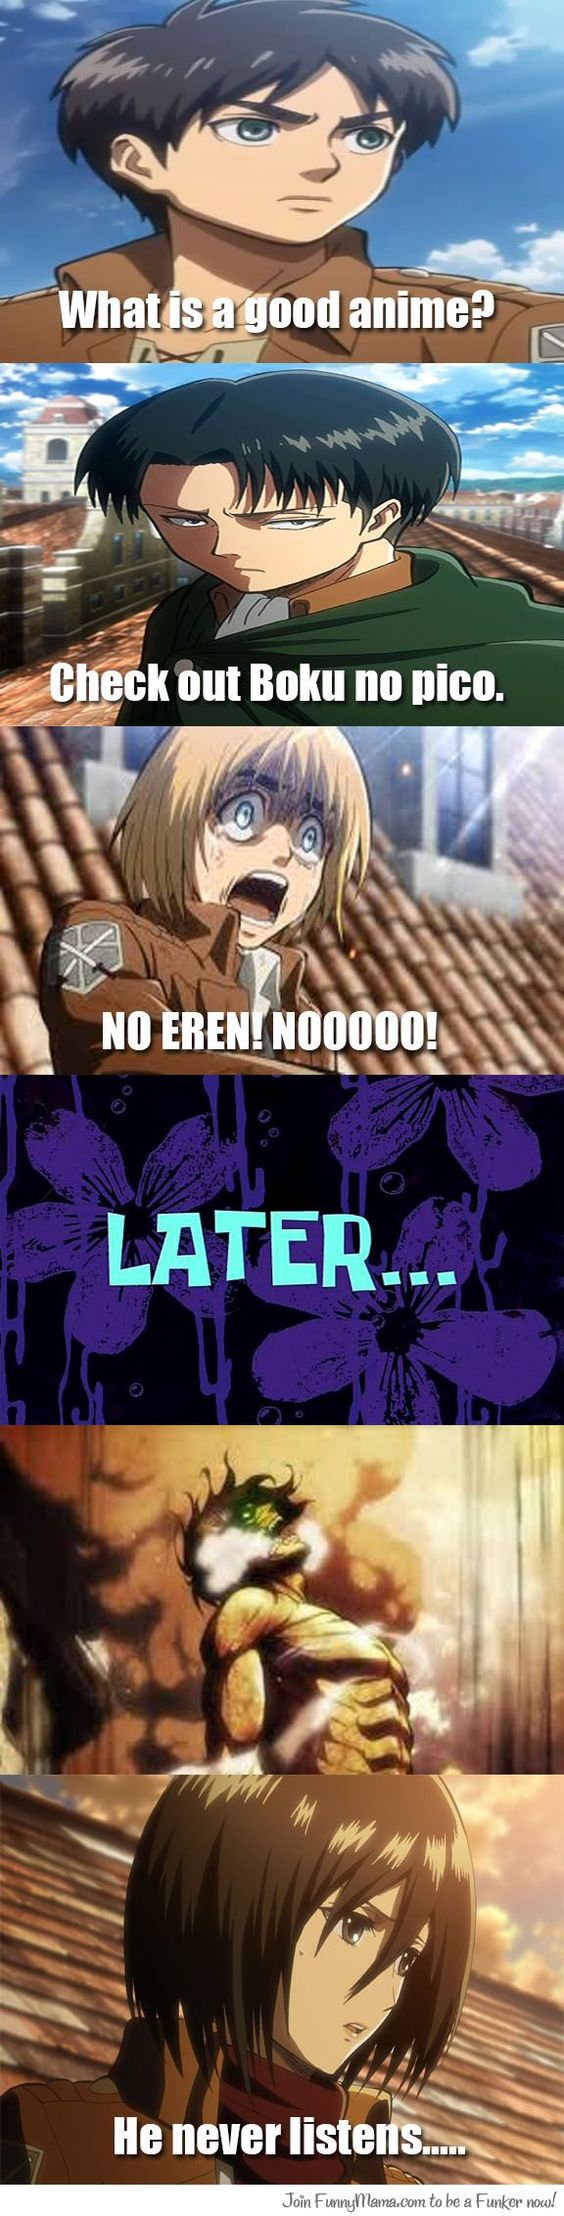 Attack on Titan. So funny!!!!! < someone told me bocu no pico is awesome and I should watch it. I'm thinking hard